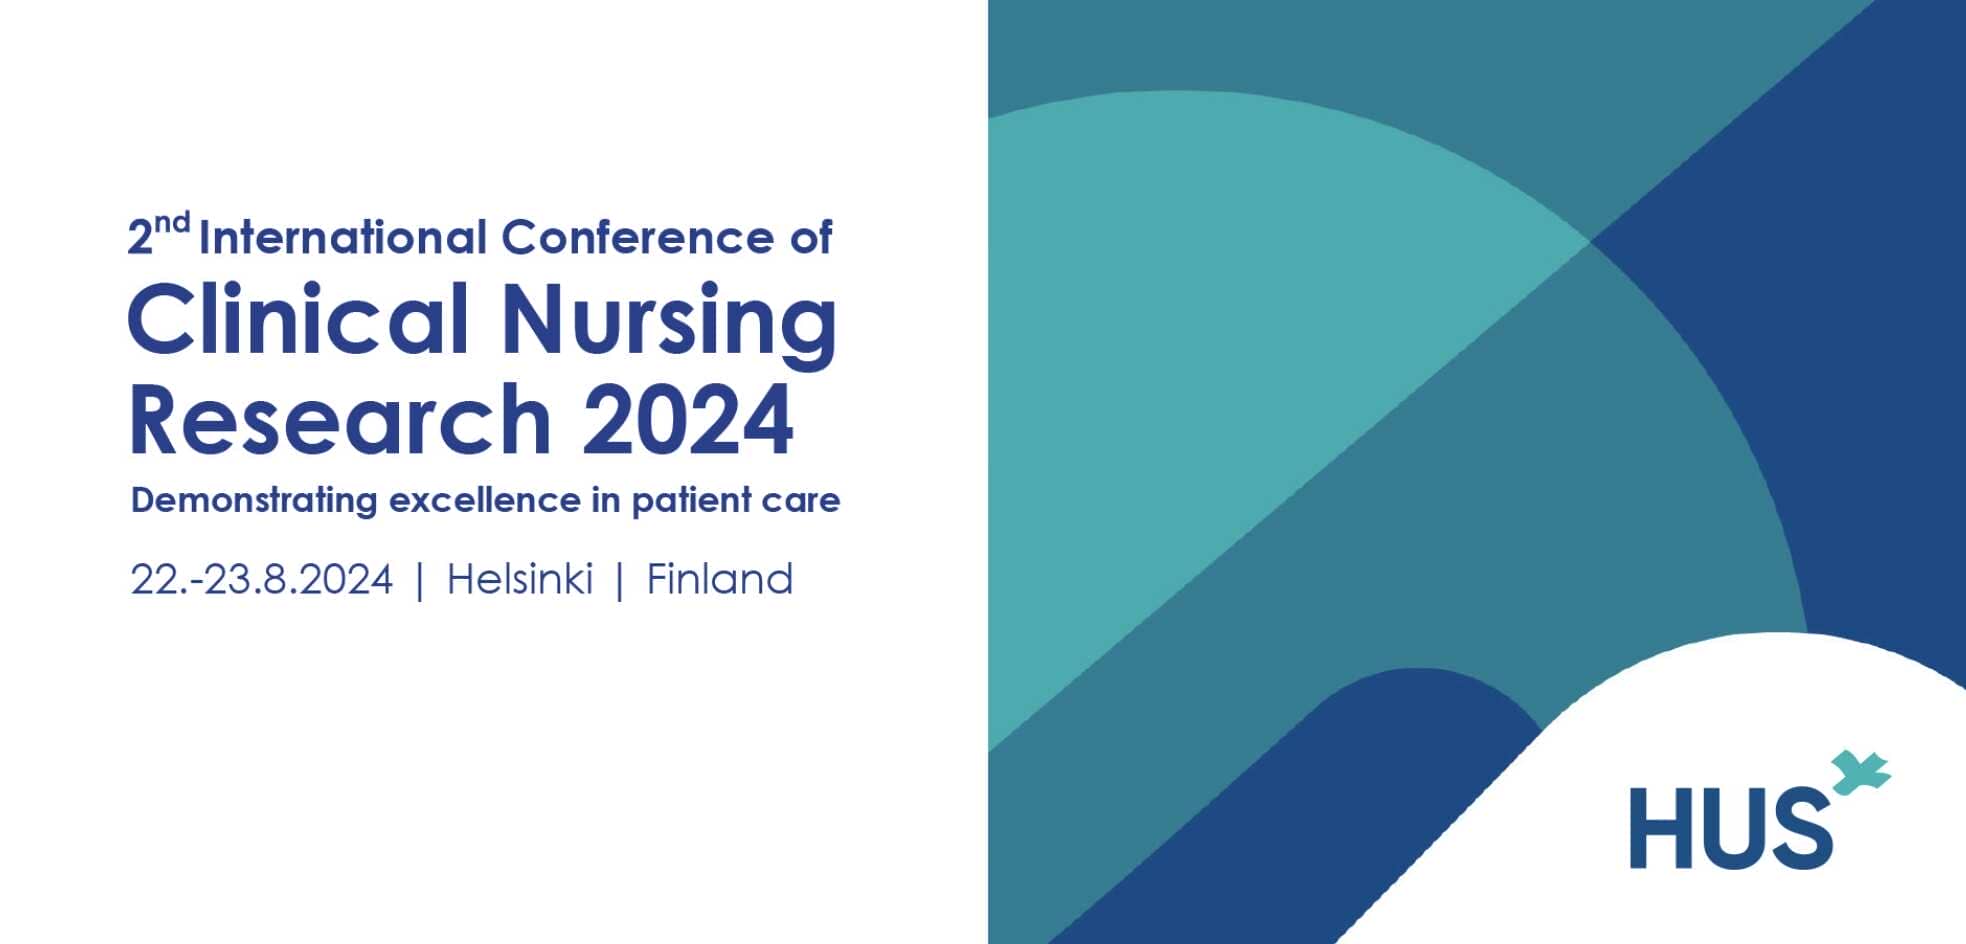 The banner of International Conference of Clinical Nursing Research 2024